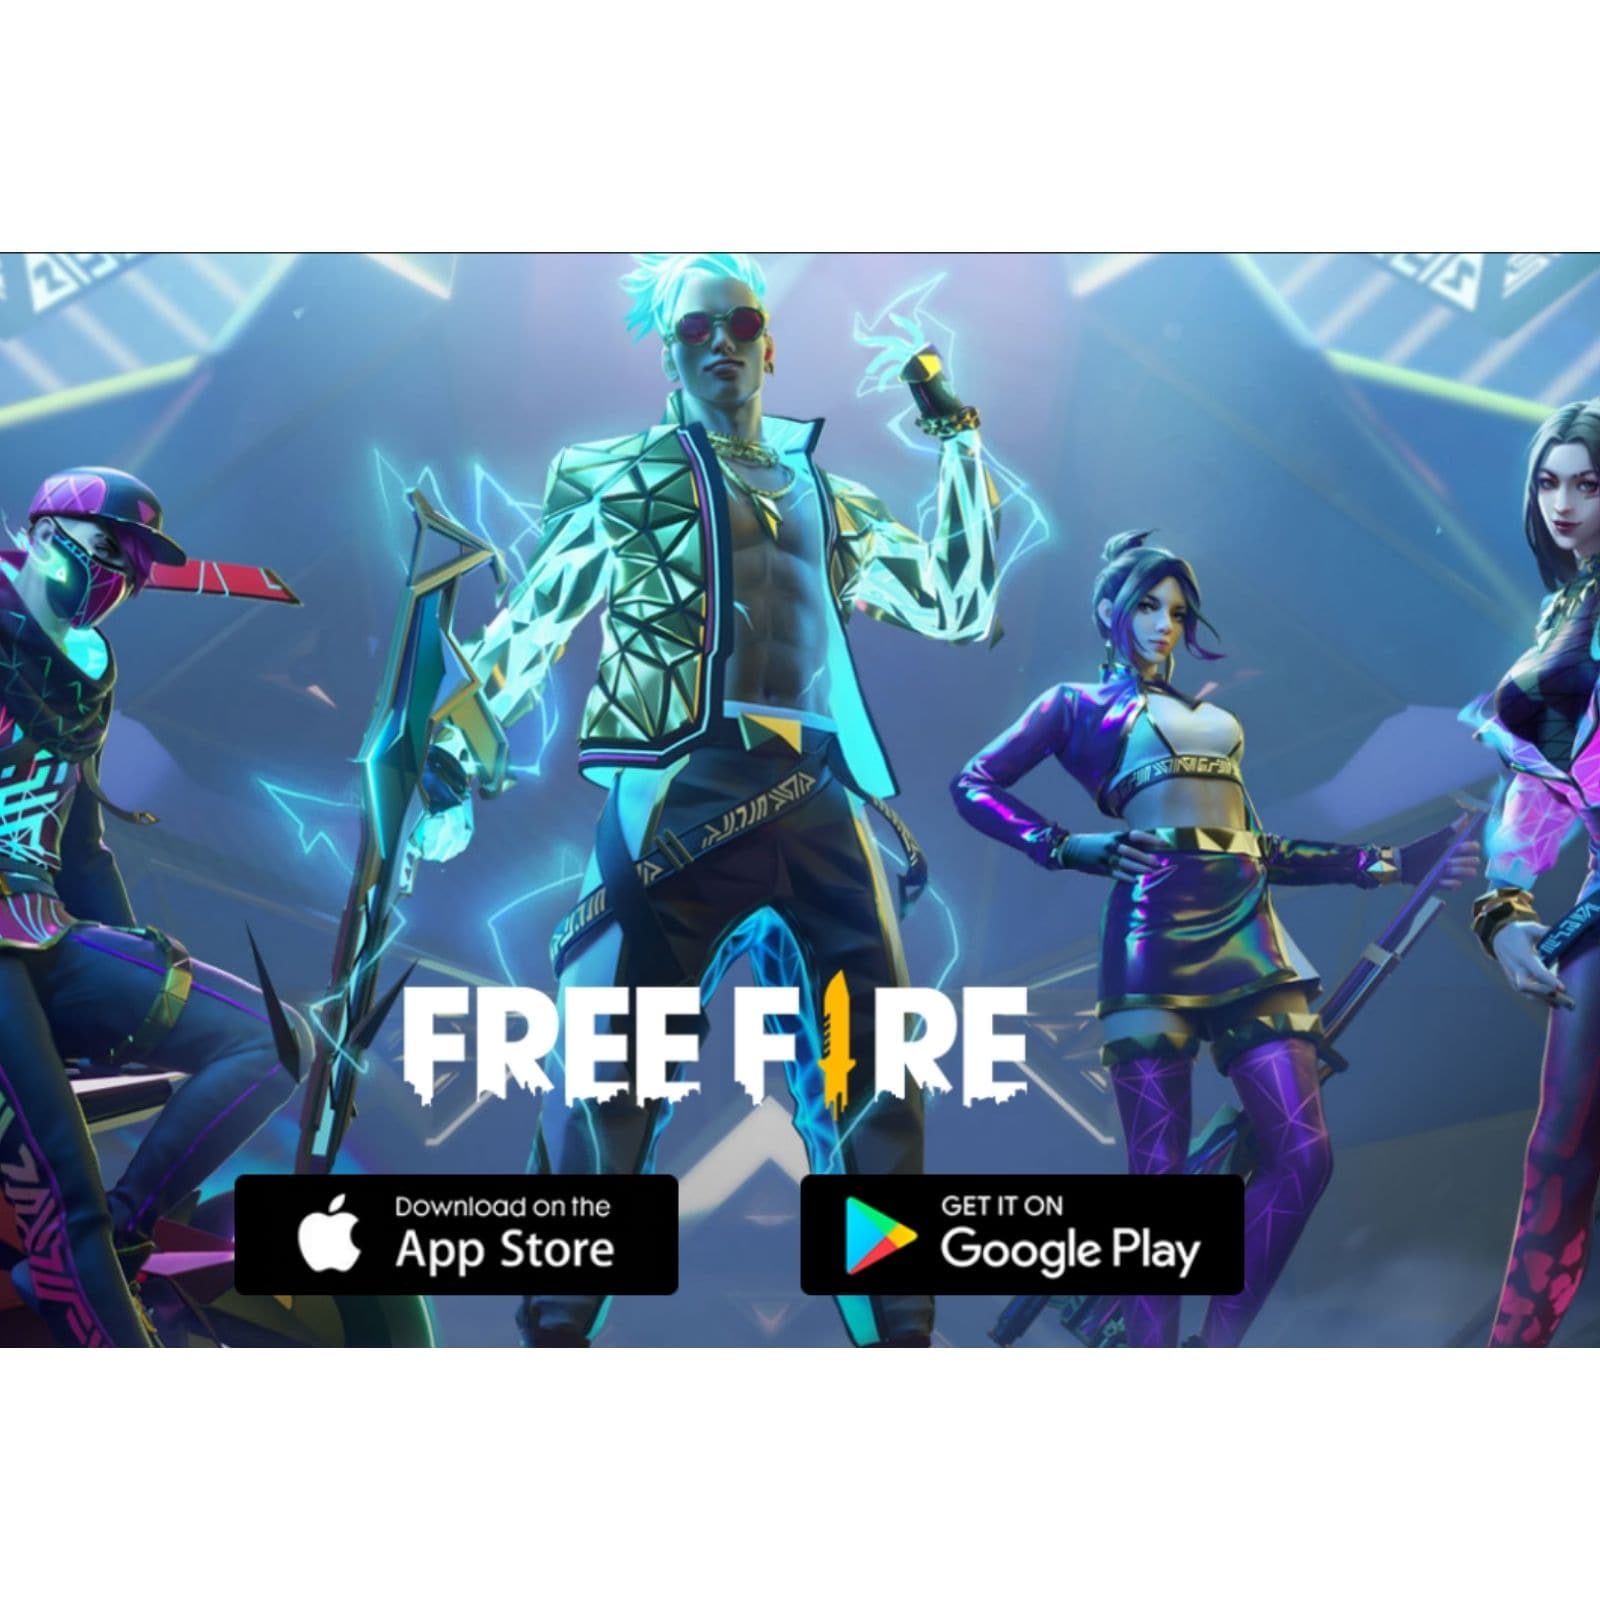 Full list of Chinese apps banned in India so far: PUBG Mobile, Garena Free  Fire, TikTok and hundreds more